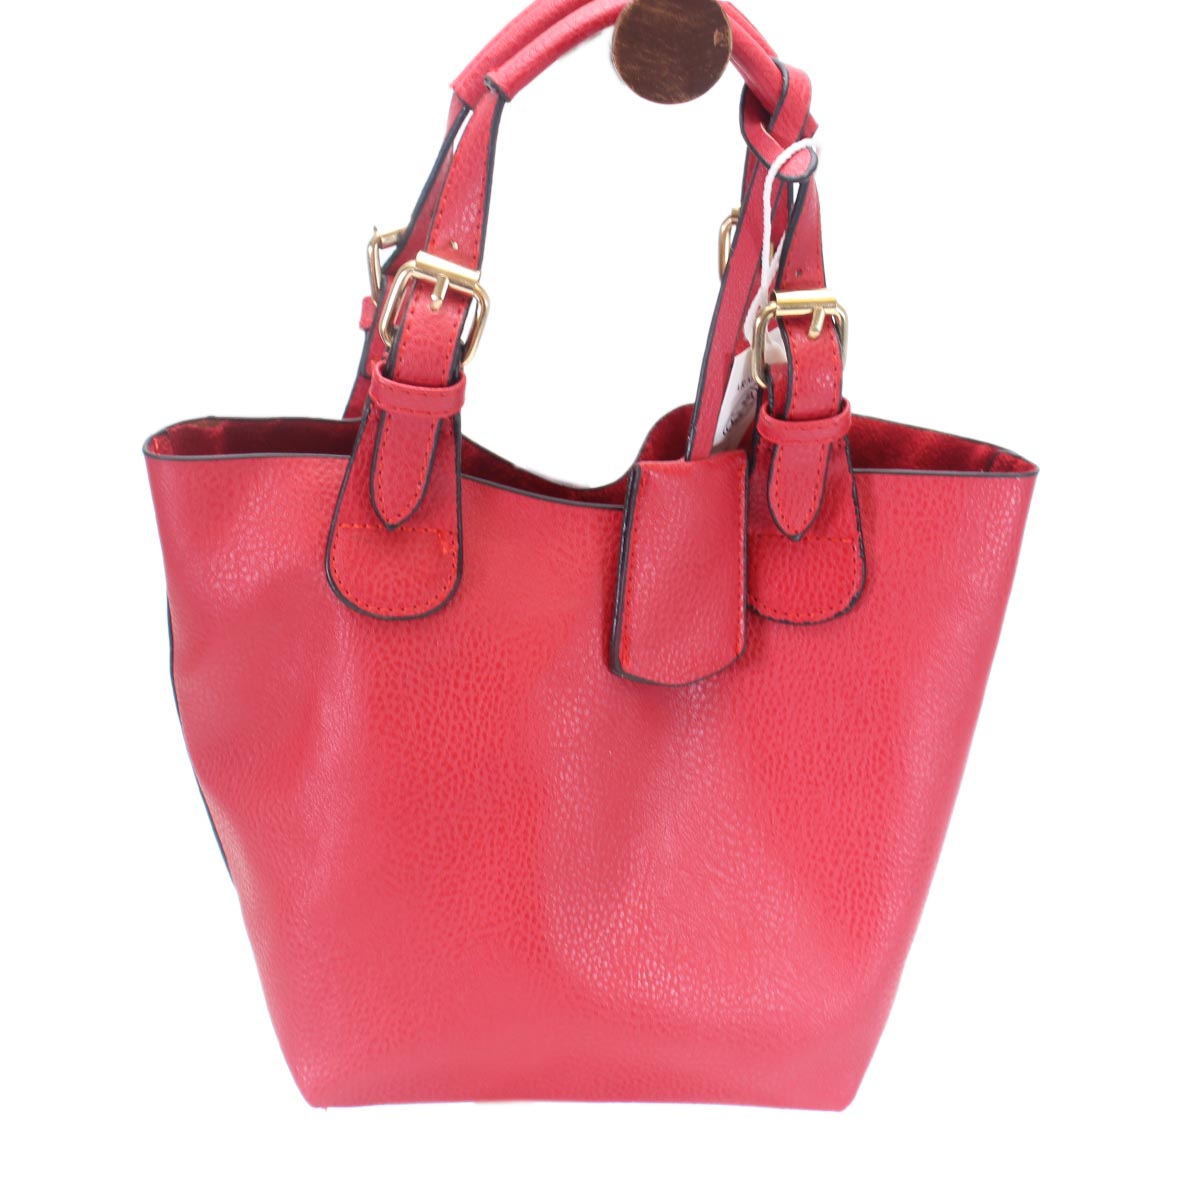  Mini faux leather bag 2 in 1 - Diba Shoes